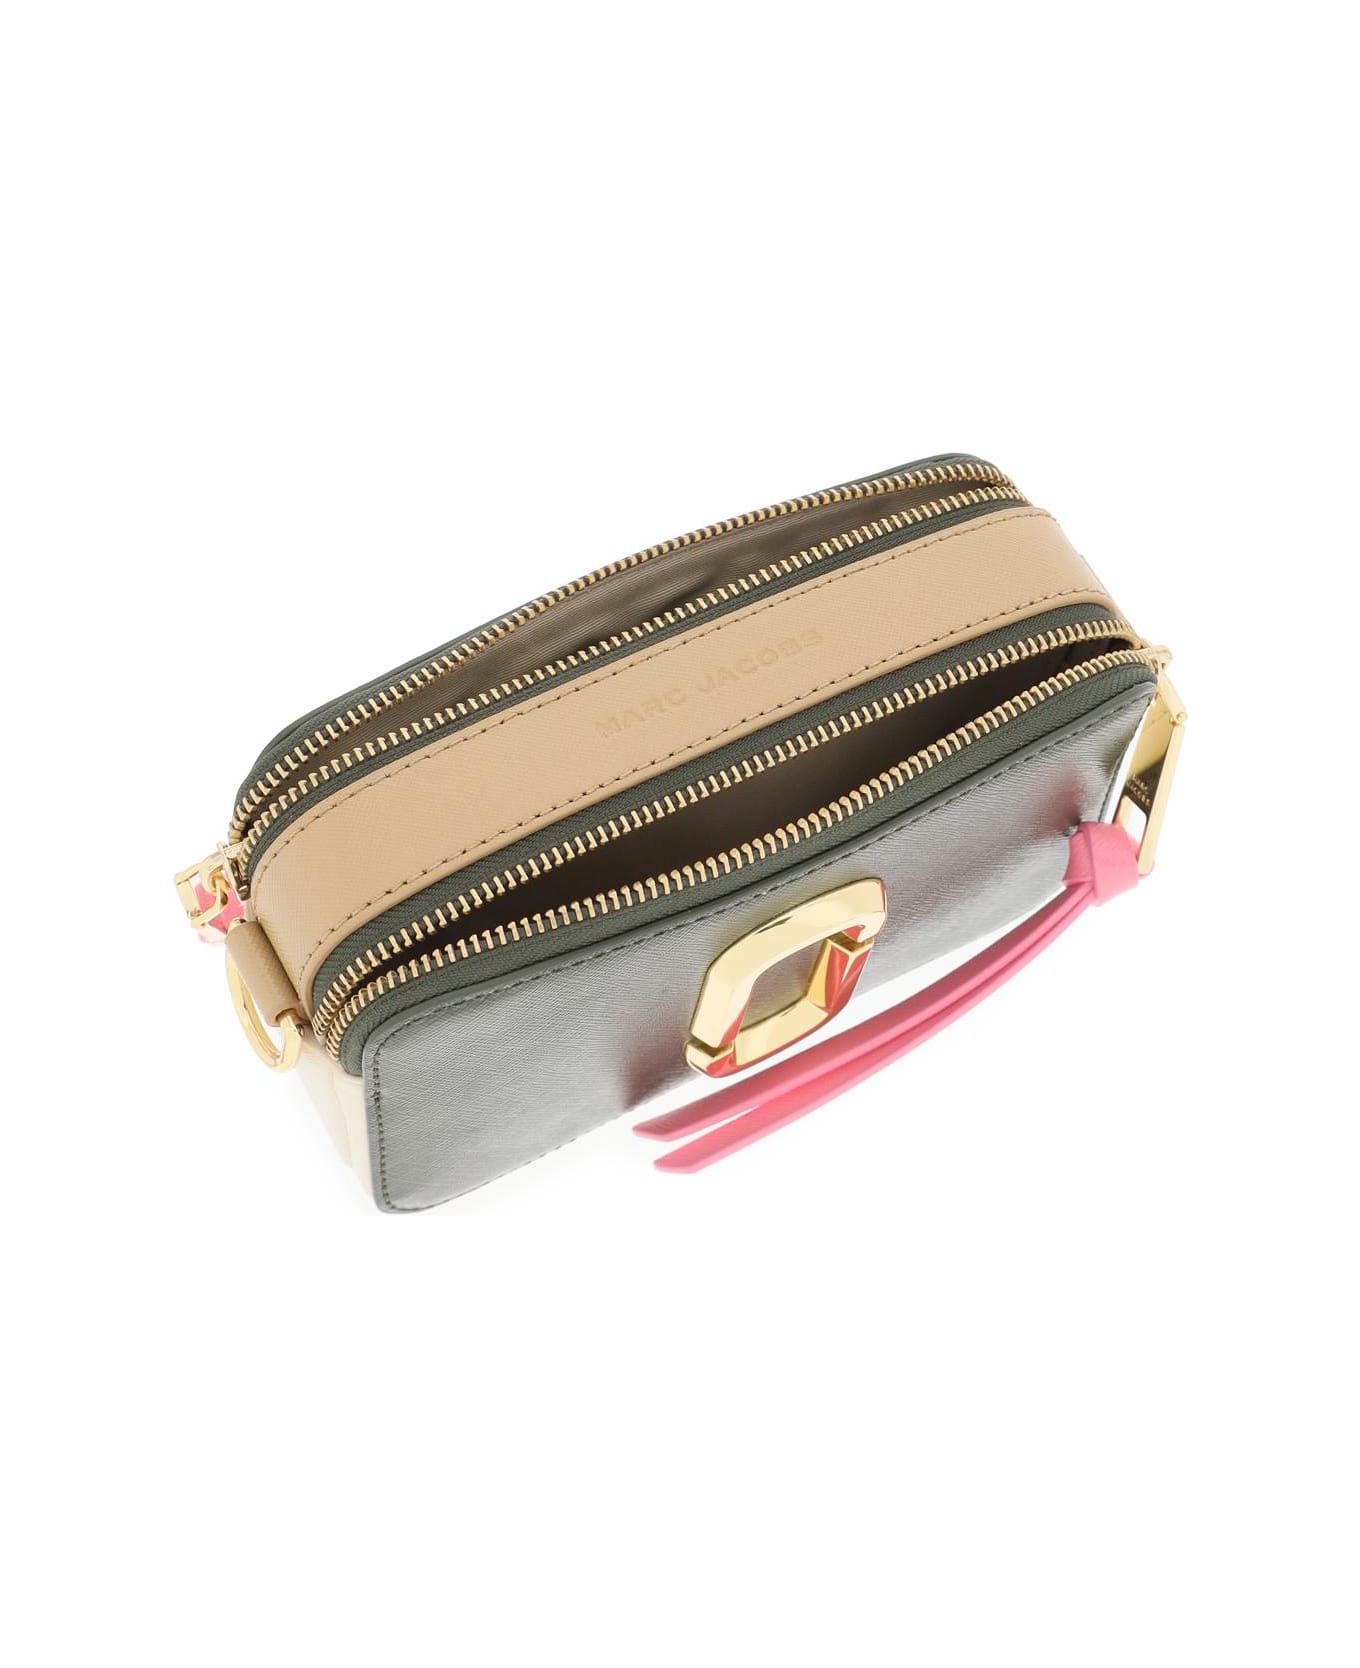 Marc Jacobs The Snapshot Camera Bag - FOREST MULTI (White)